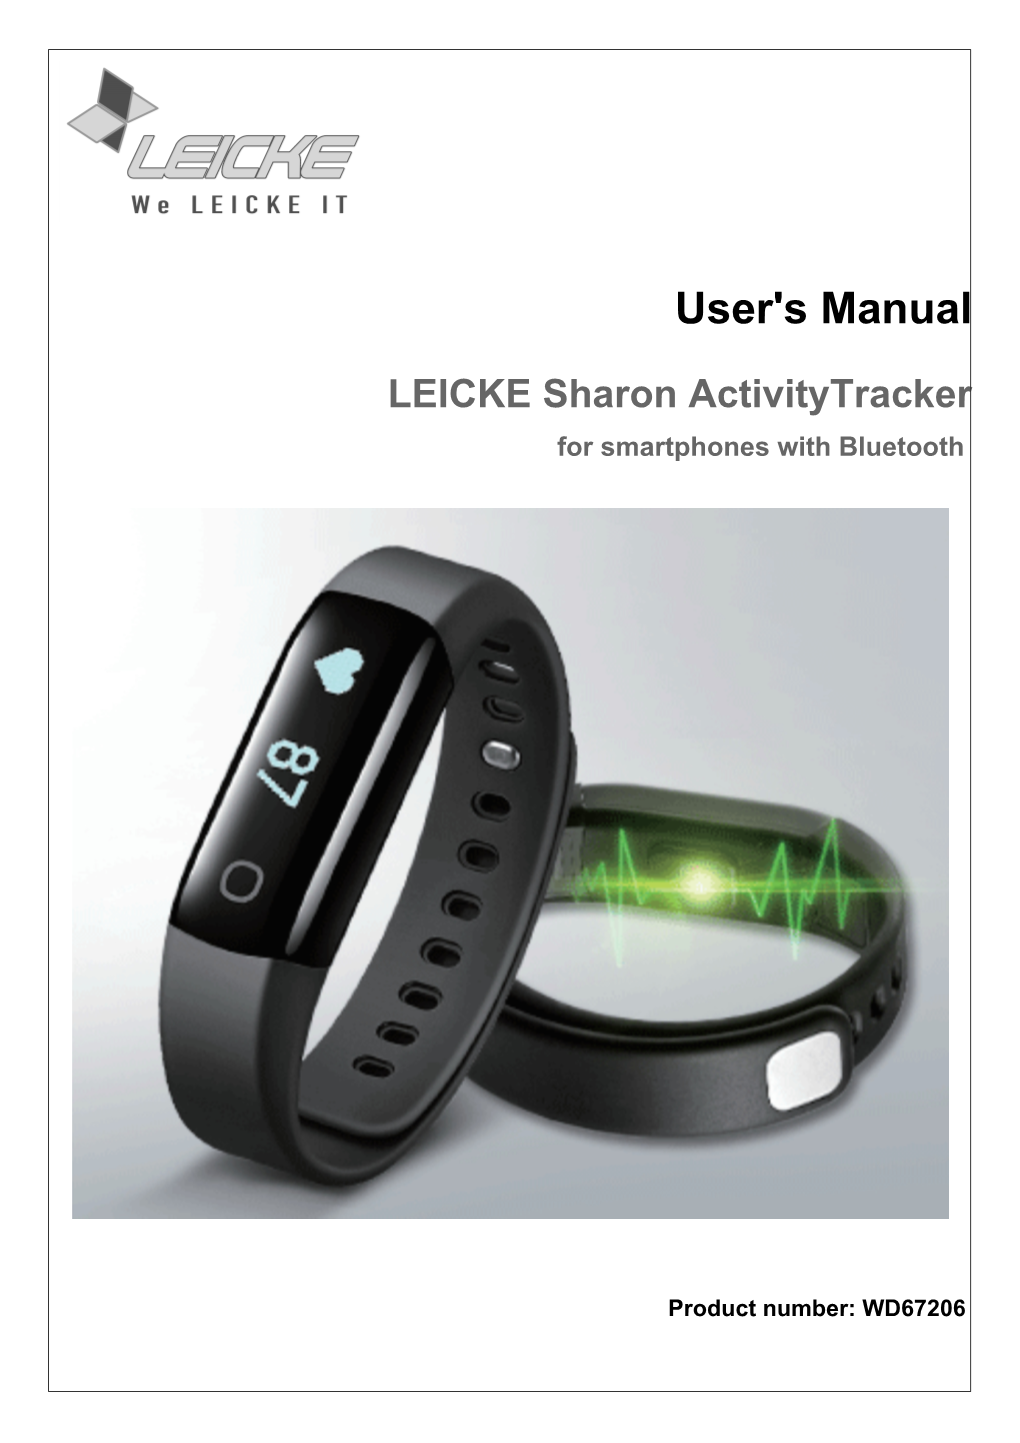 User's Manual LEICKE Sharon Activitytracker for Smartphones with Bluetooth